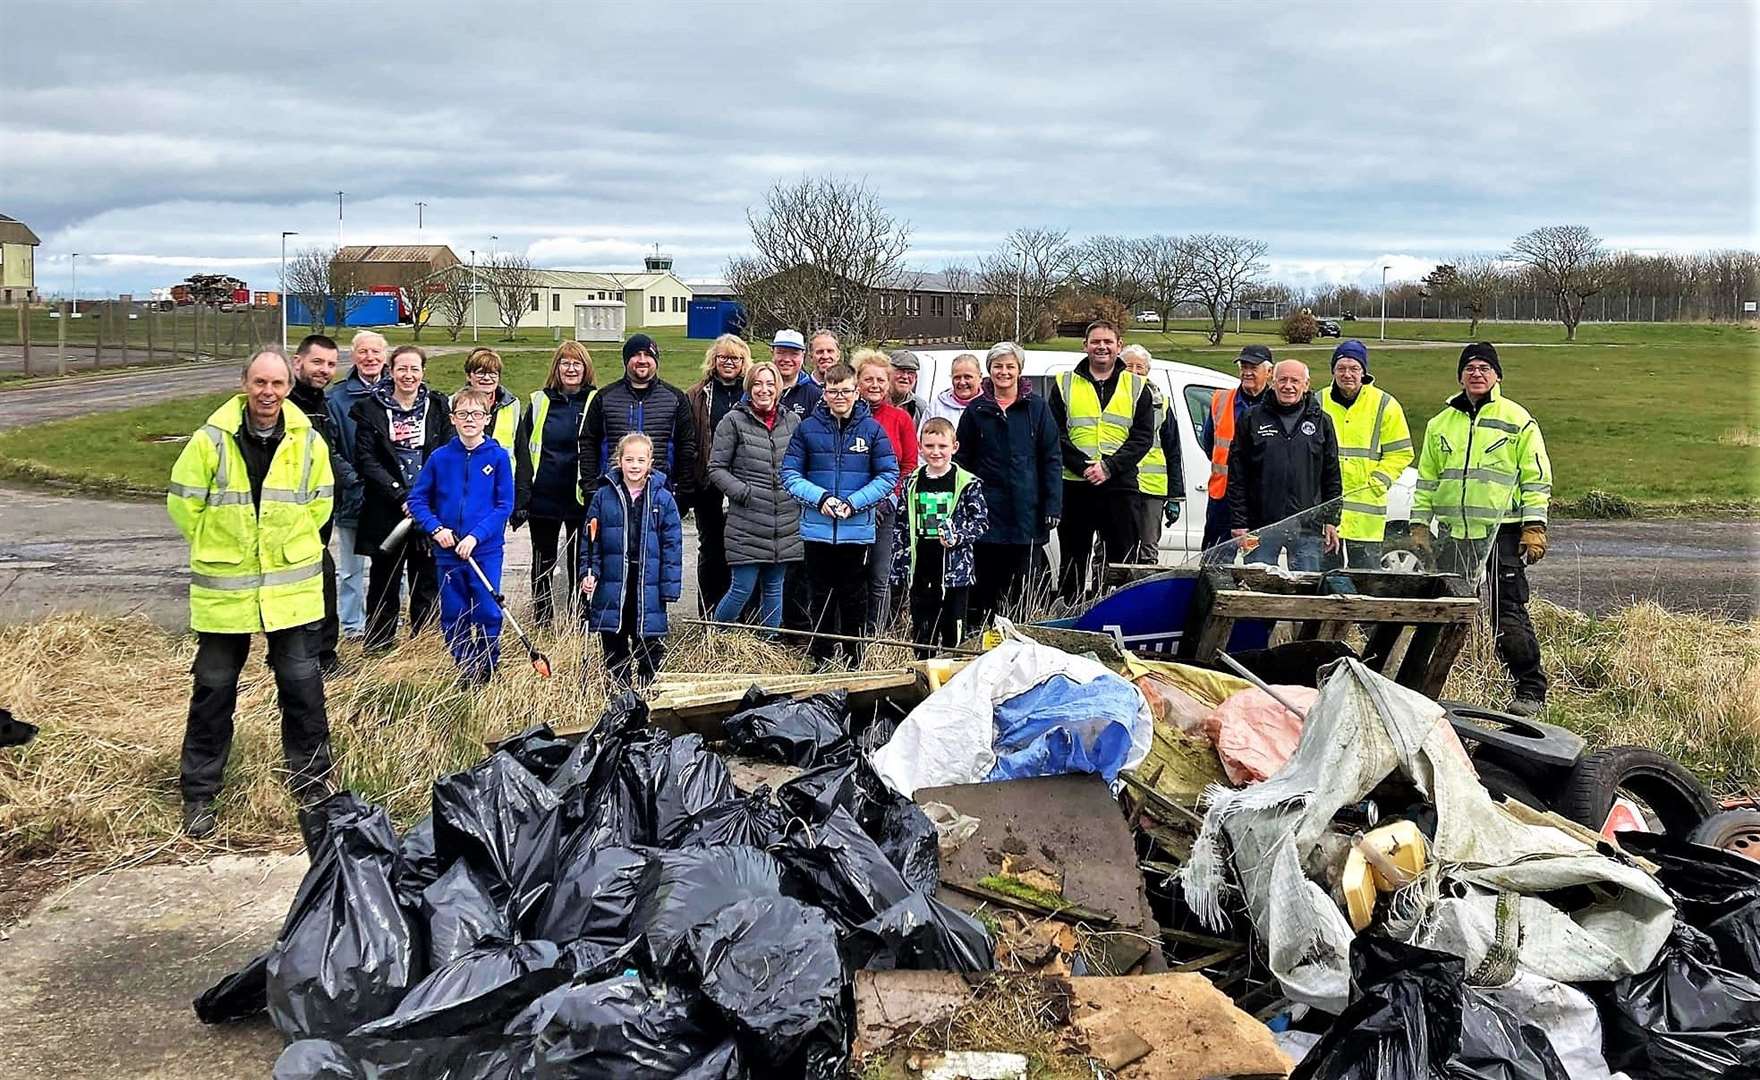 A spring clean event around Wick's industrial estate at the airport amassed this huge amount of rubbish. It is hoped to replicate this at a summer clean event planned for July 19 ahead of Wick's Gala Week.